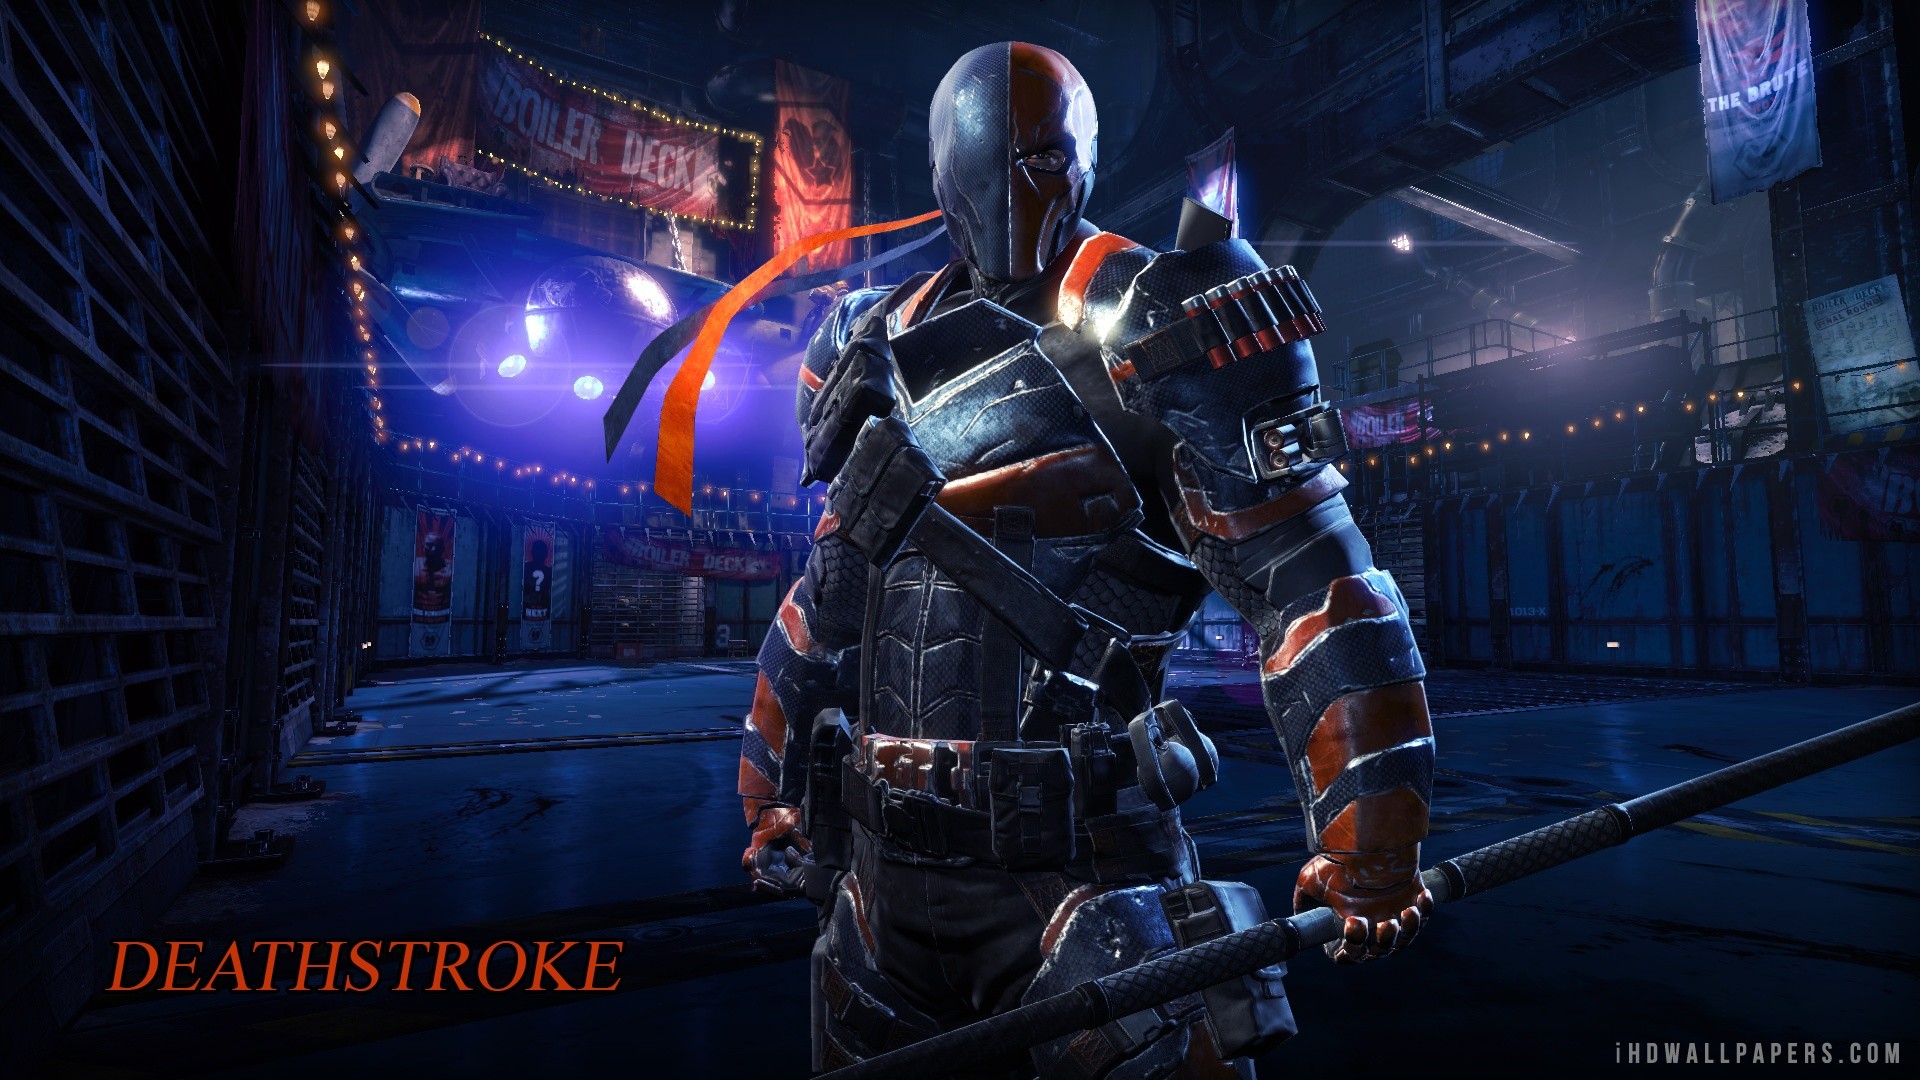 1920x1080 Awesome Deathstroke Wallpapers in High Quality, Chelo Blazey